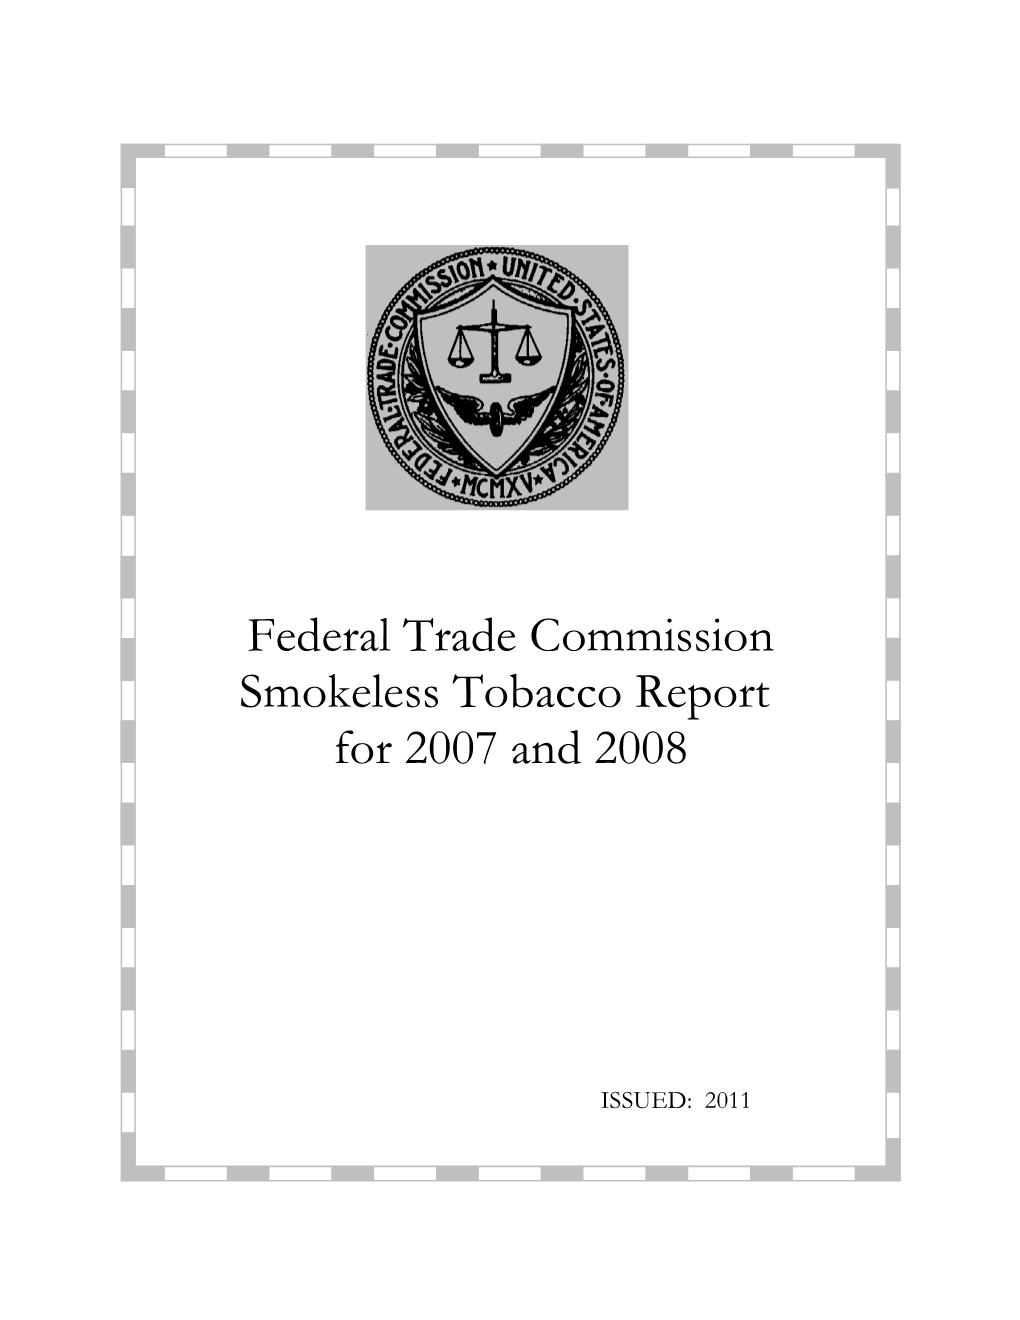 Federal Trade Commission Smokeless Tobacco Report for 2007 and 2008